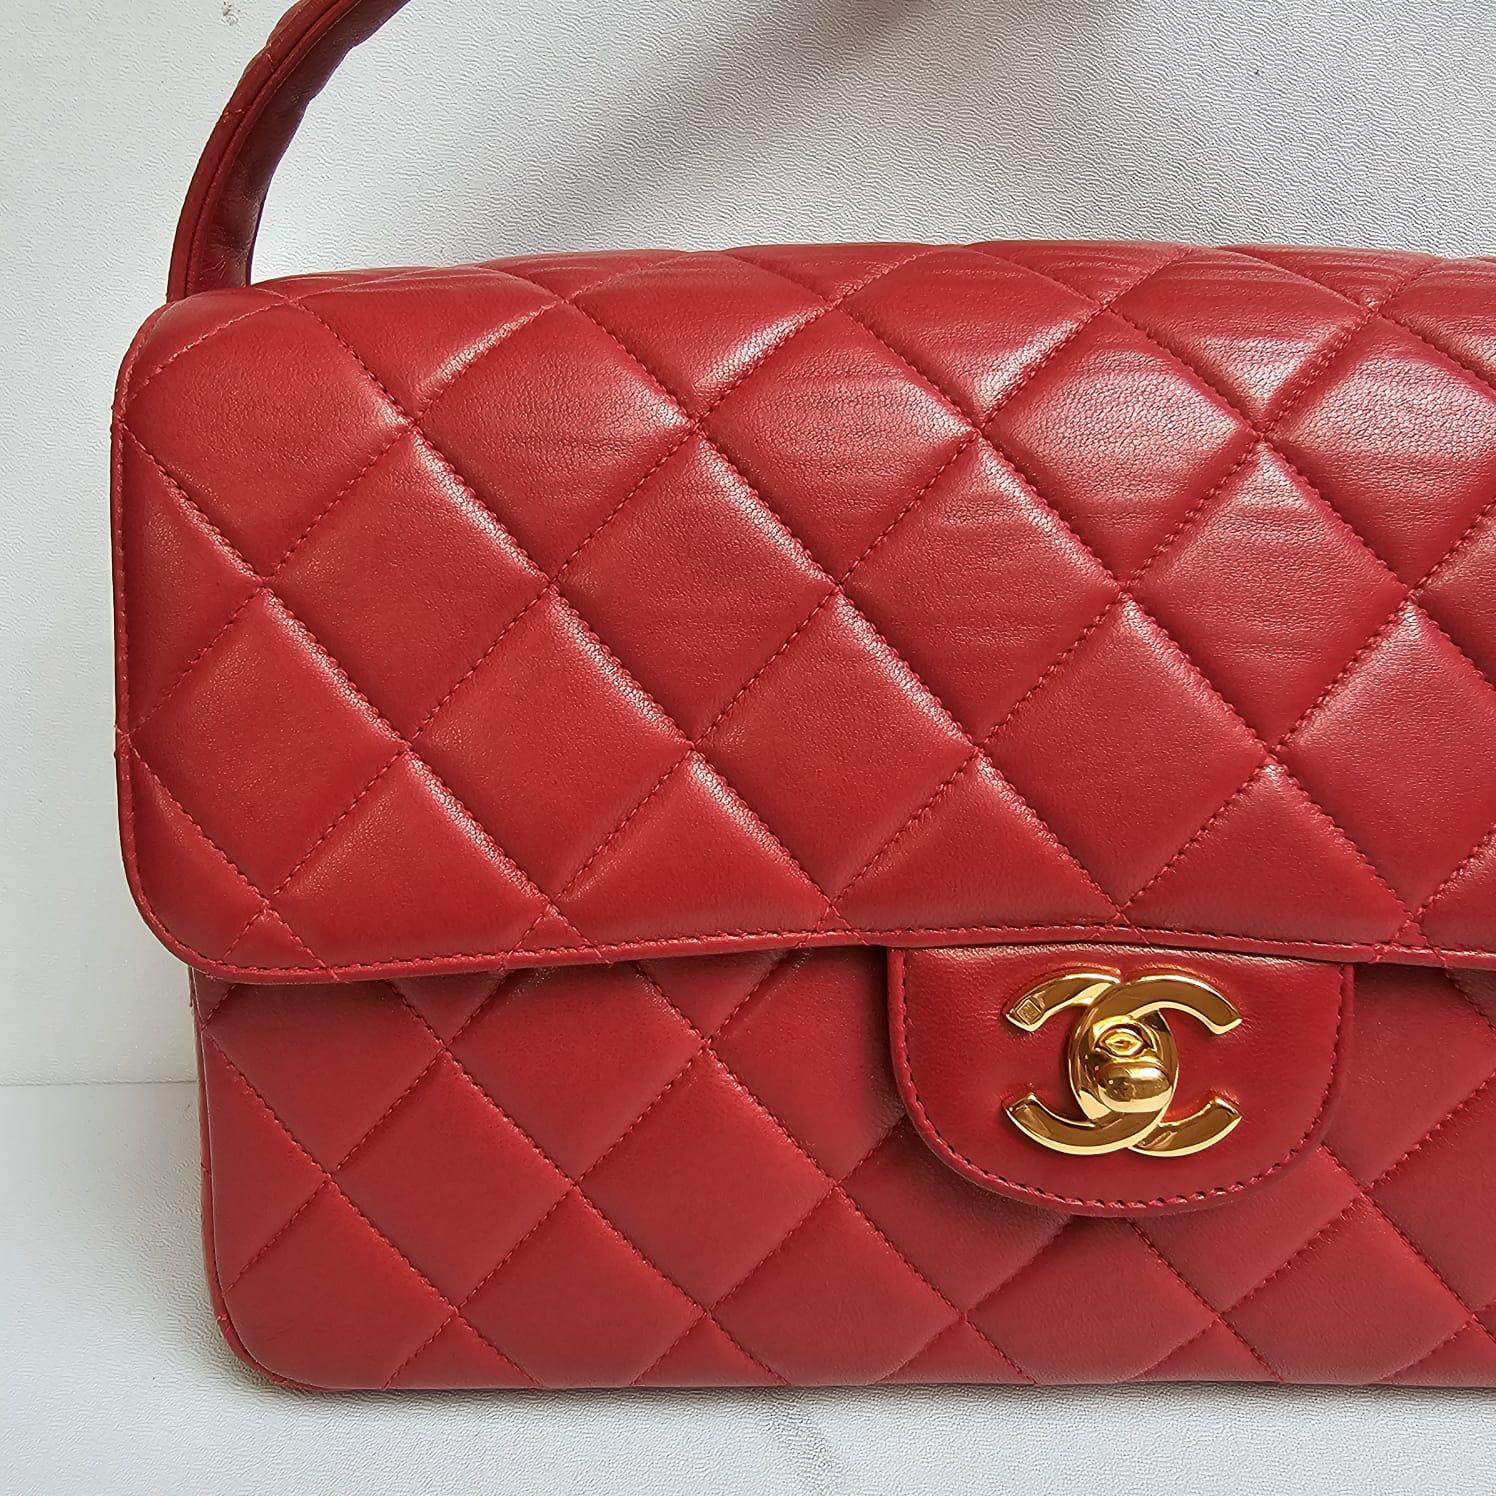 Chanel Vintage Red Lambskin Medium Quilted Double Face Top Handle Bag For Sale 5